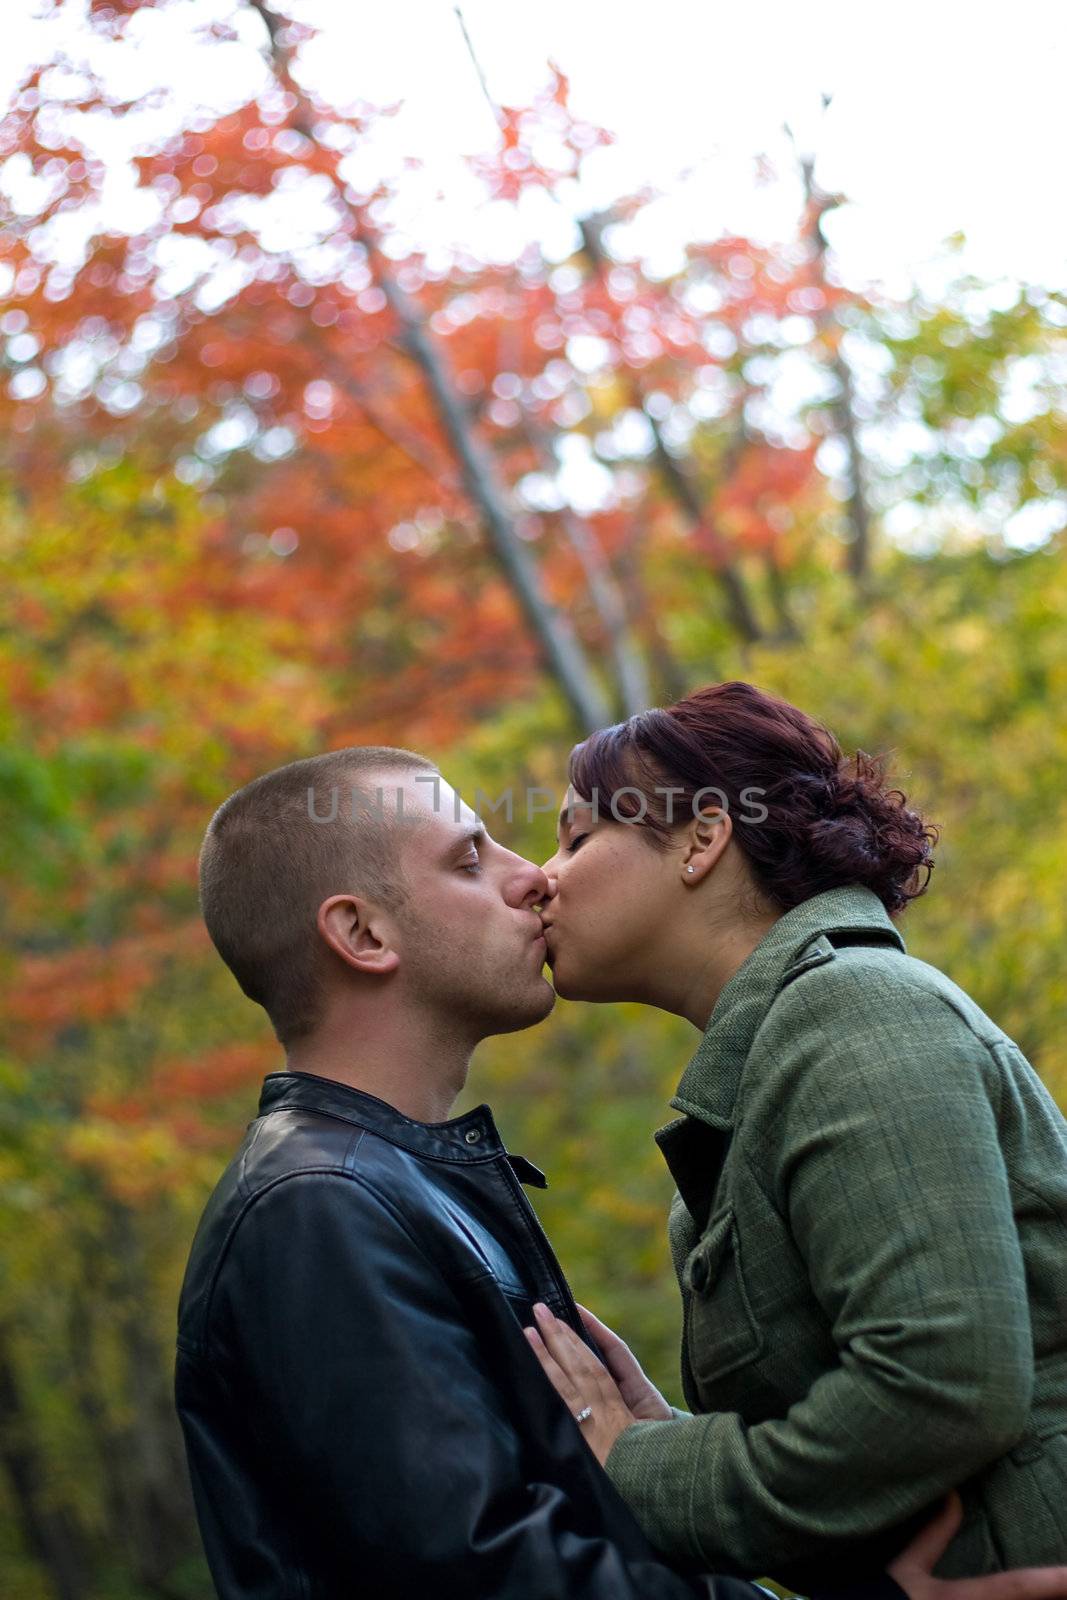 A young happy couple passionately kissing each other outdoors during fall or autumn.